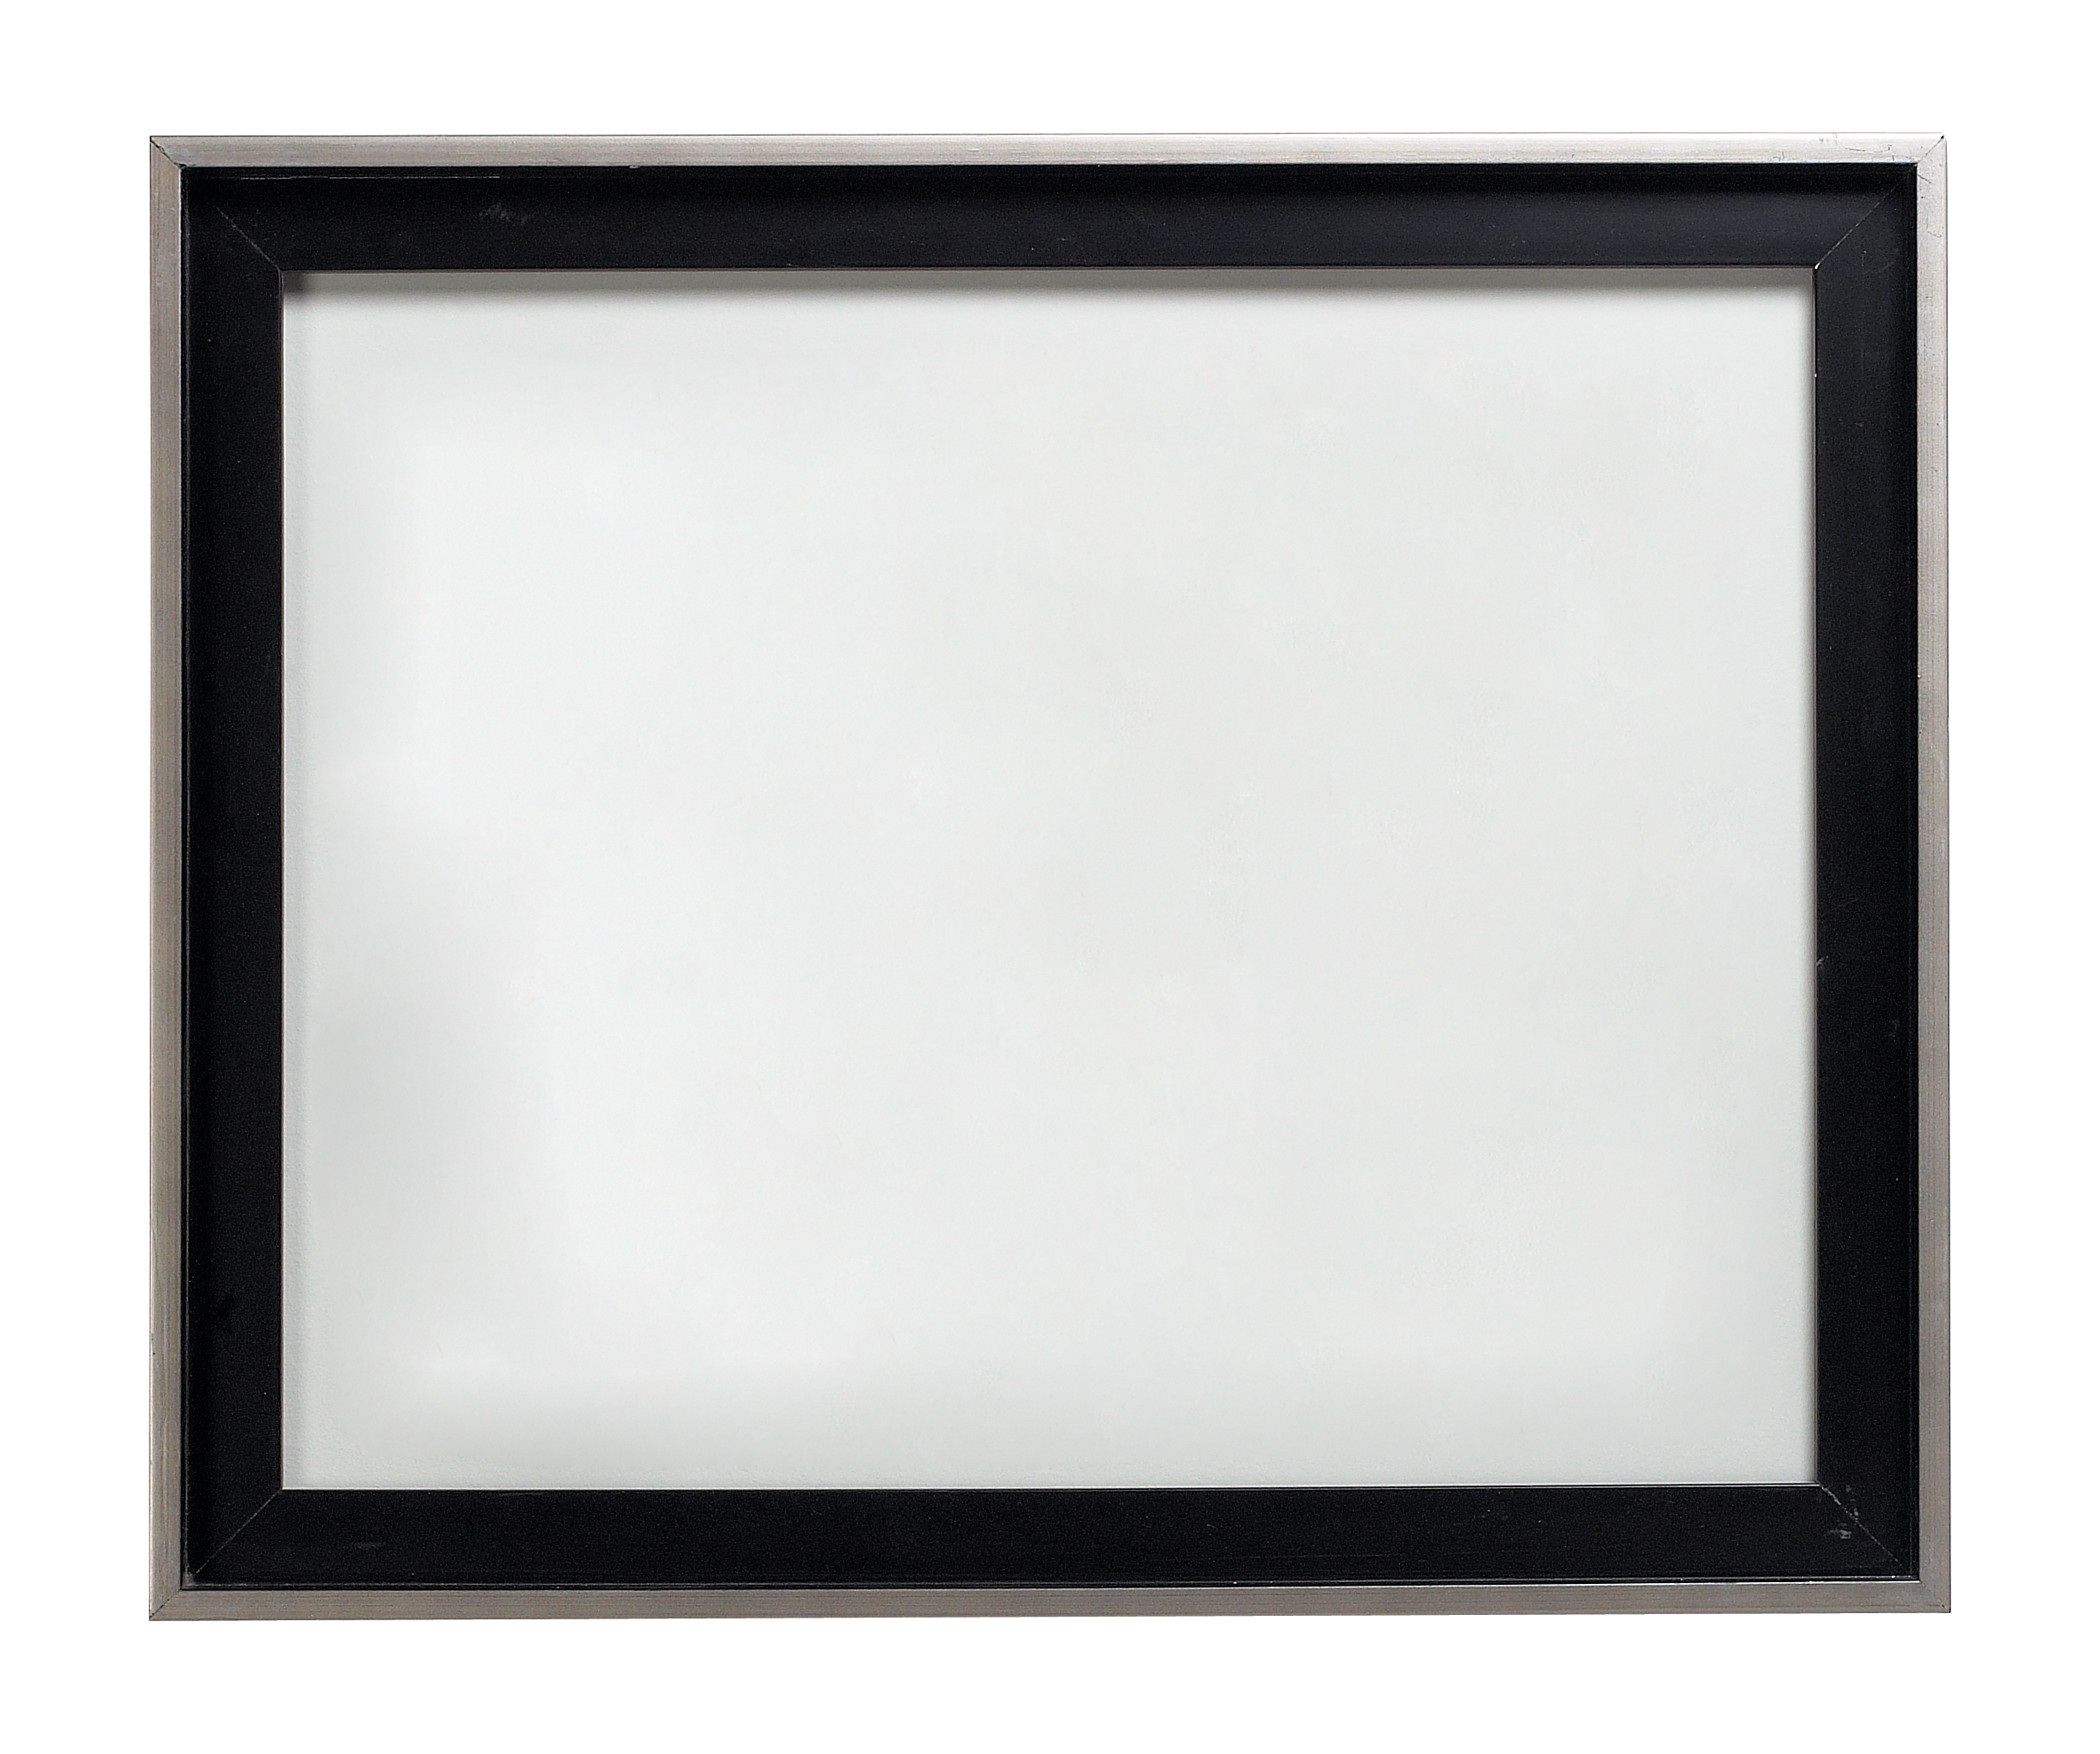 Black Picture Frame   Clipart Panda   Free Clipart Images